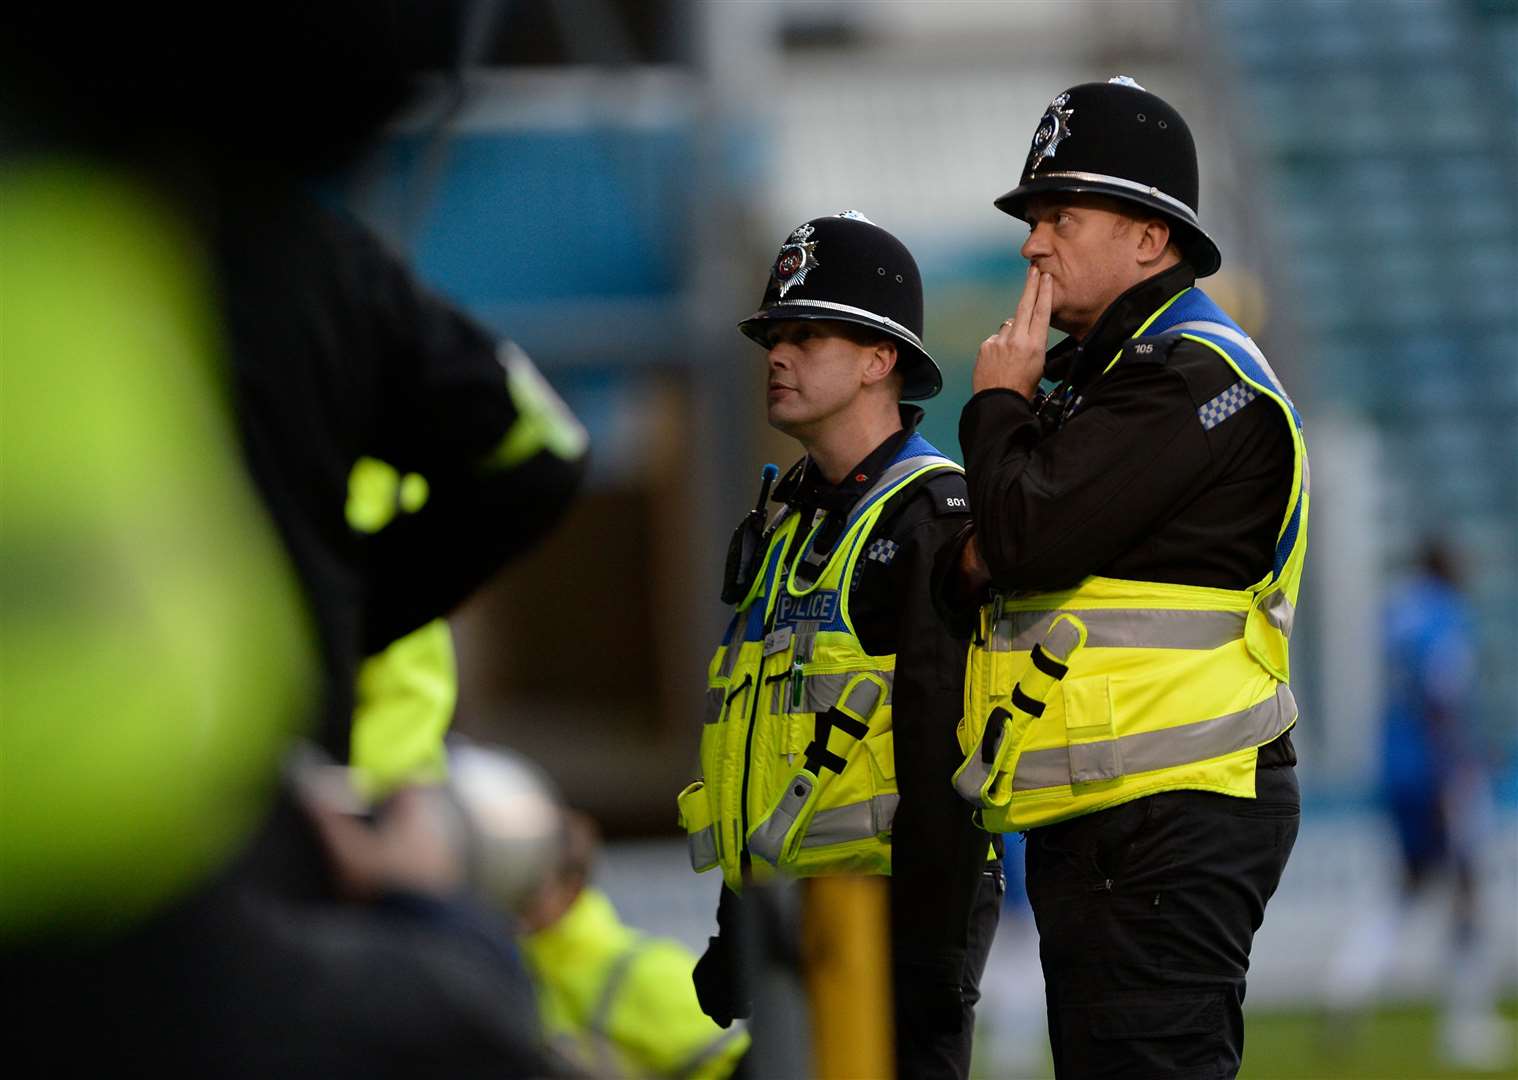 Crowds would be up but policing costs would increase with more local derbies